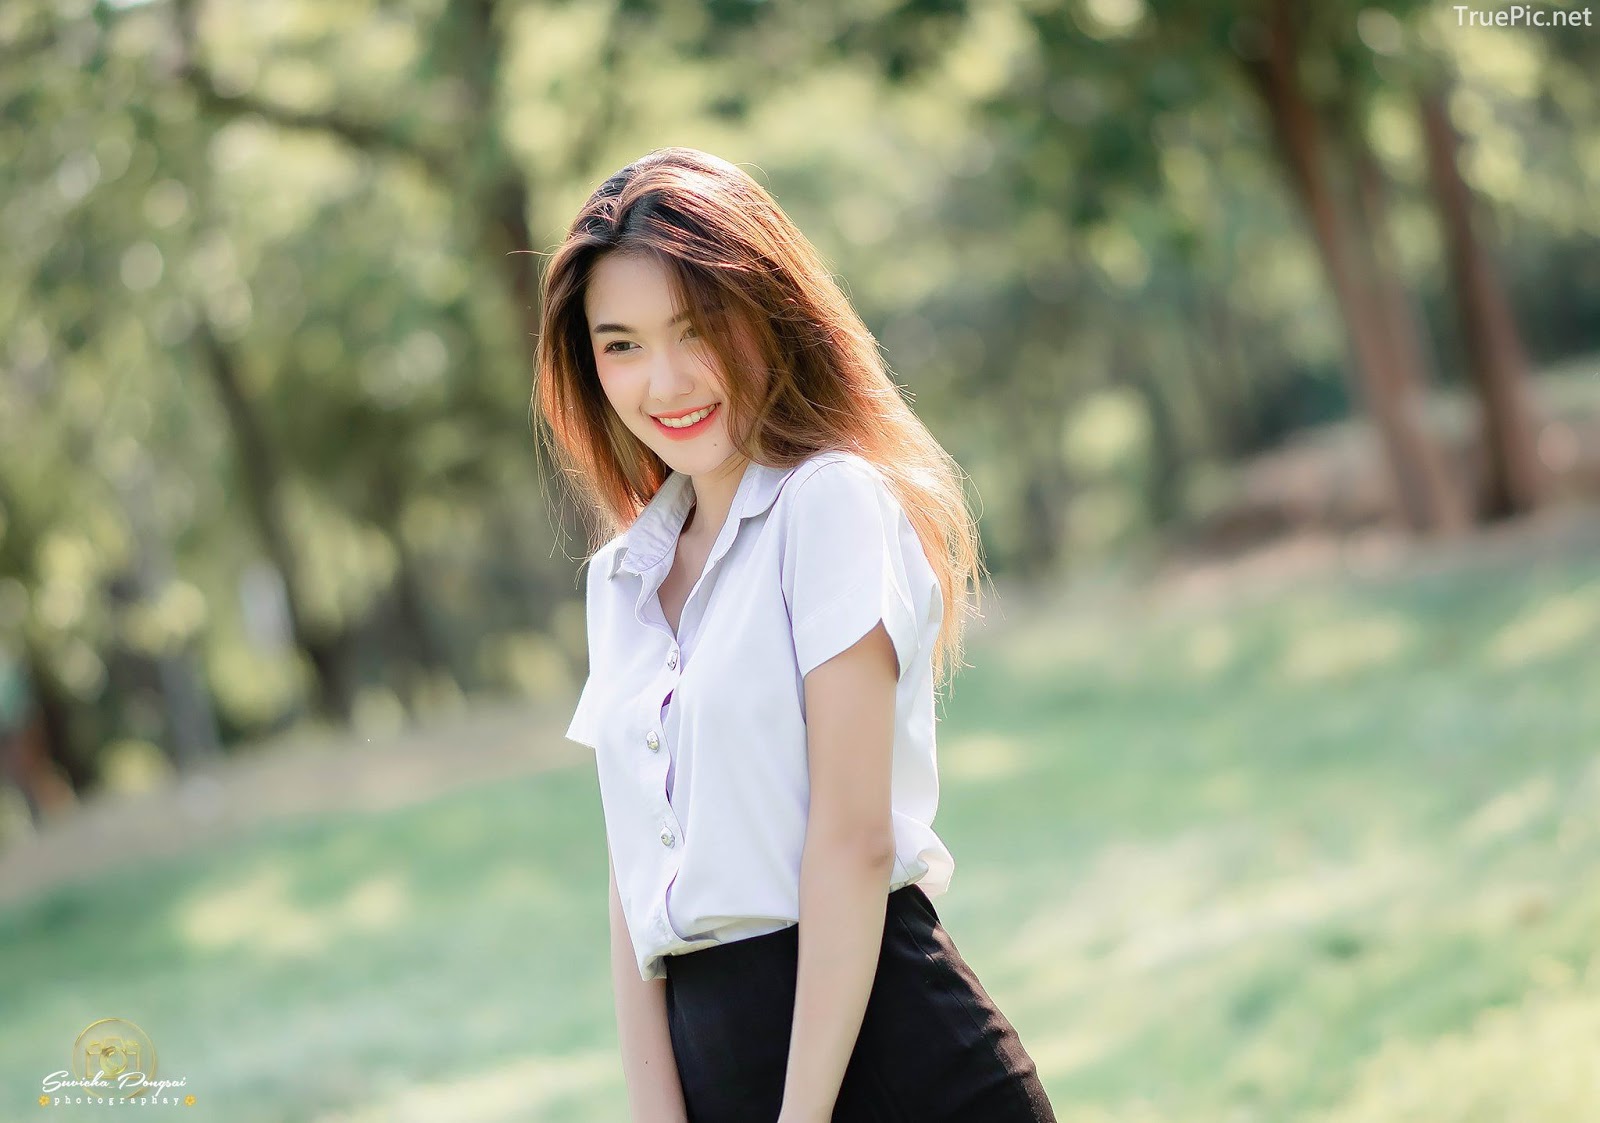 Cute Student With a Sweet Smile âšš Hot Girl Thailand Pitcha Srisattabuth.